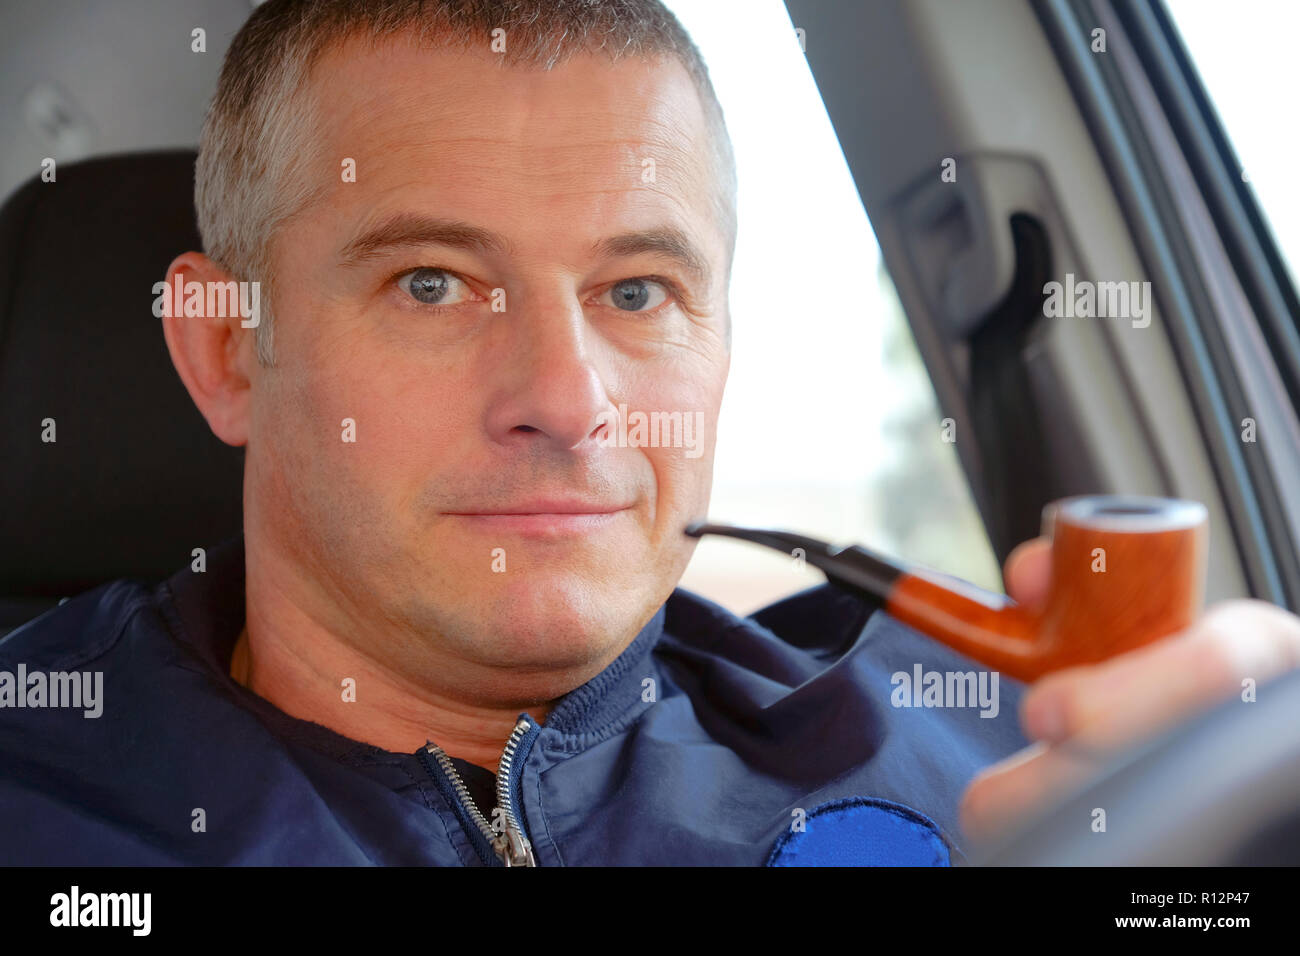 The man in the car driving. Tobacco pipe in hand. Stock Photo